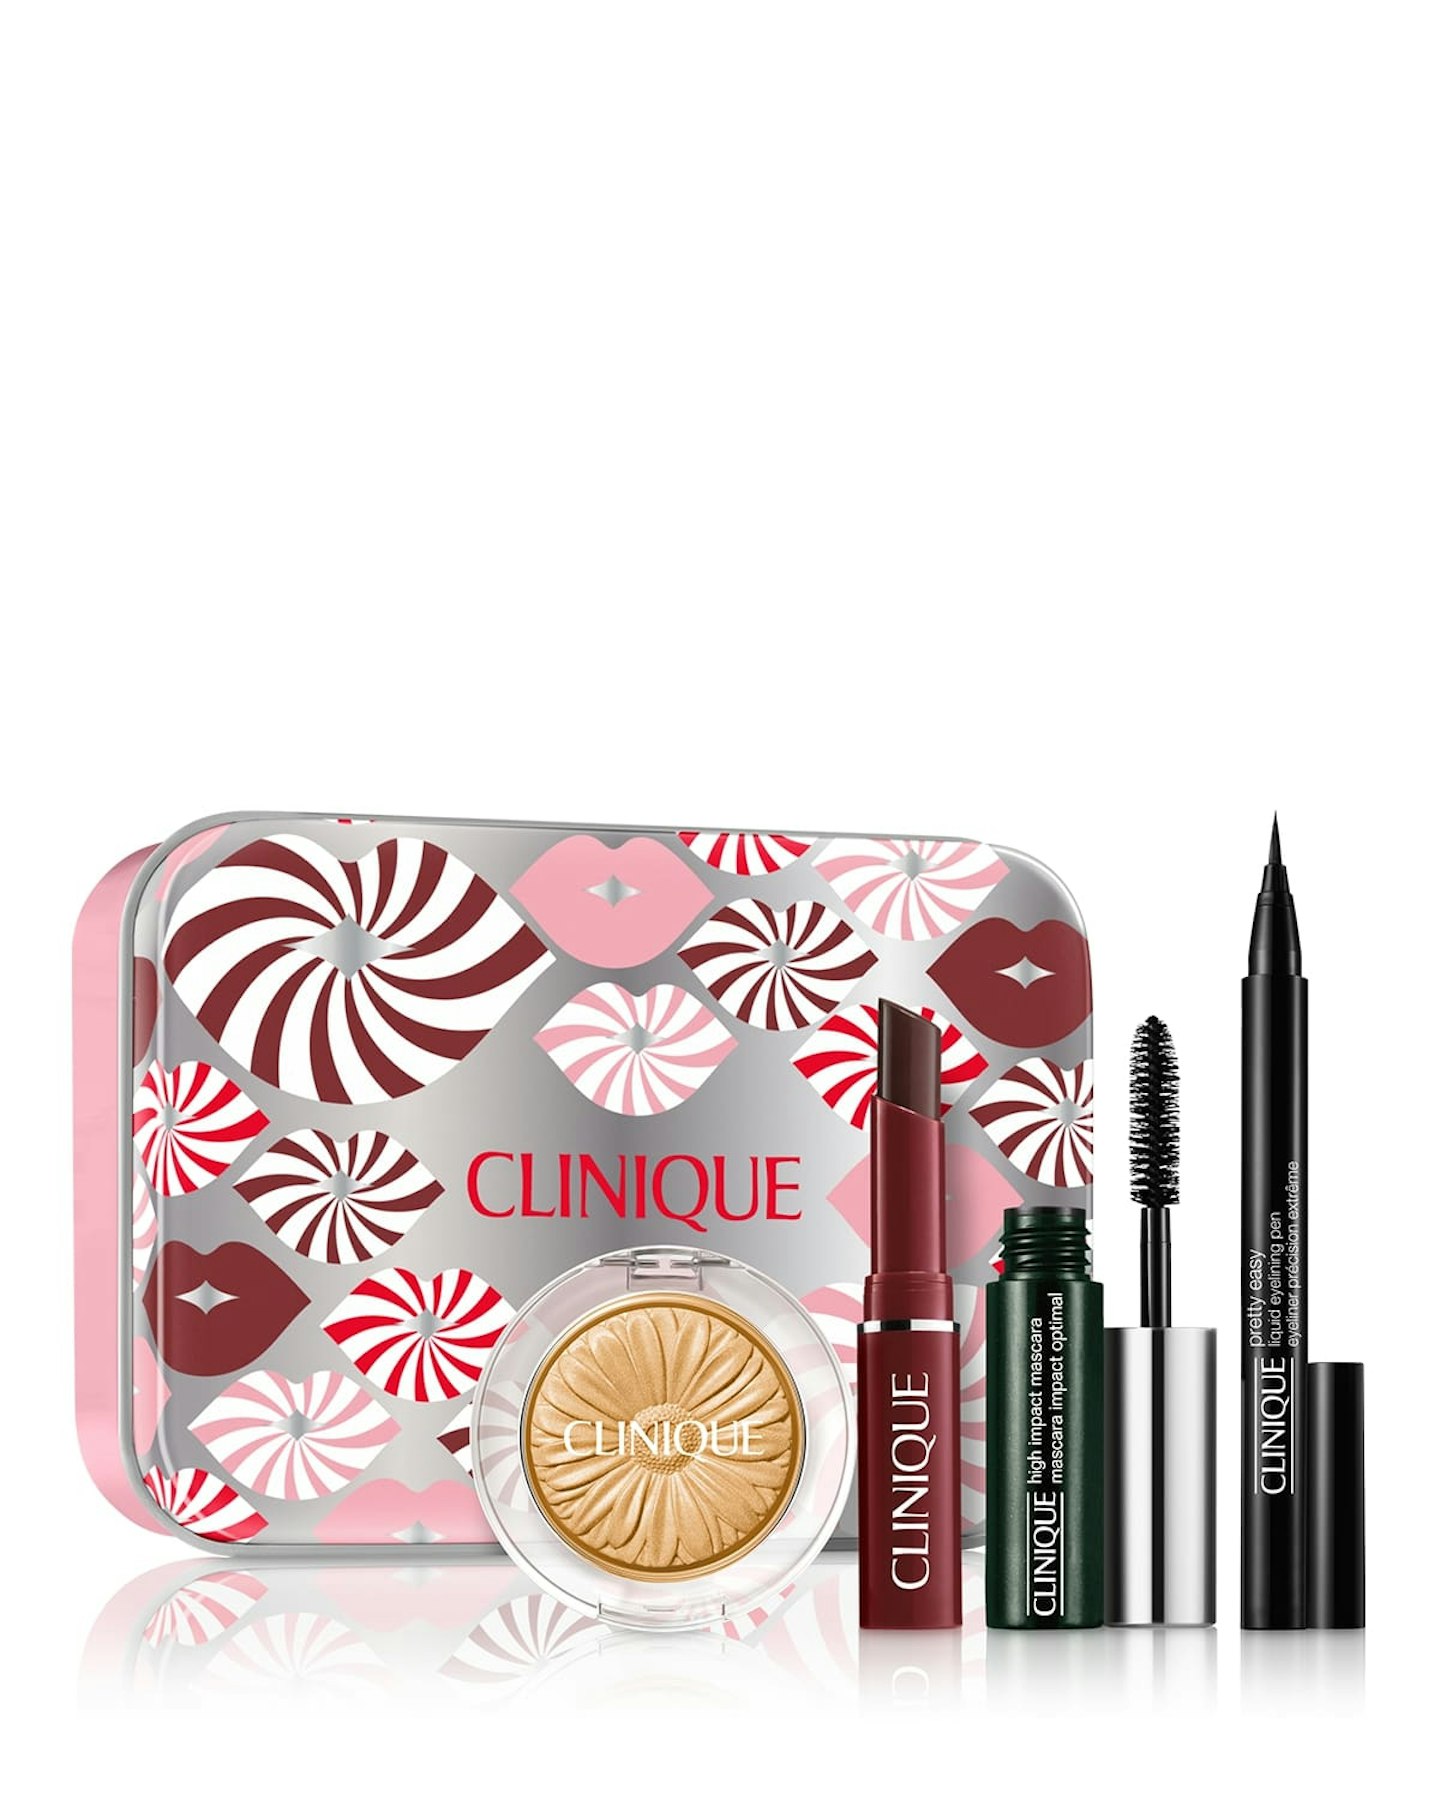 Clinique Must Have Make Up Set, £29.60 (was £37 saving £7.40)